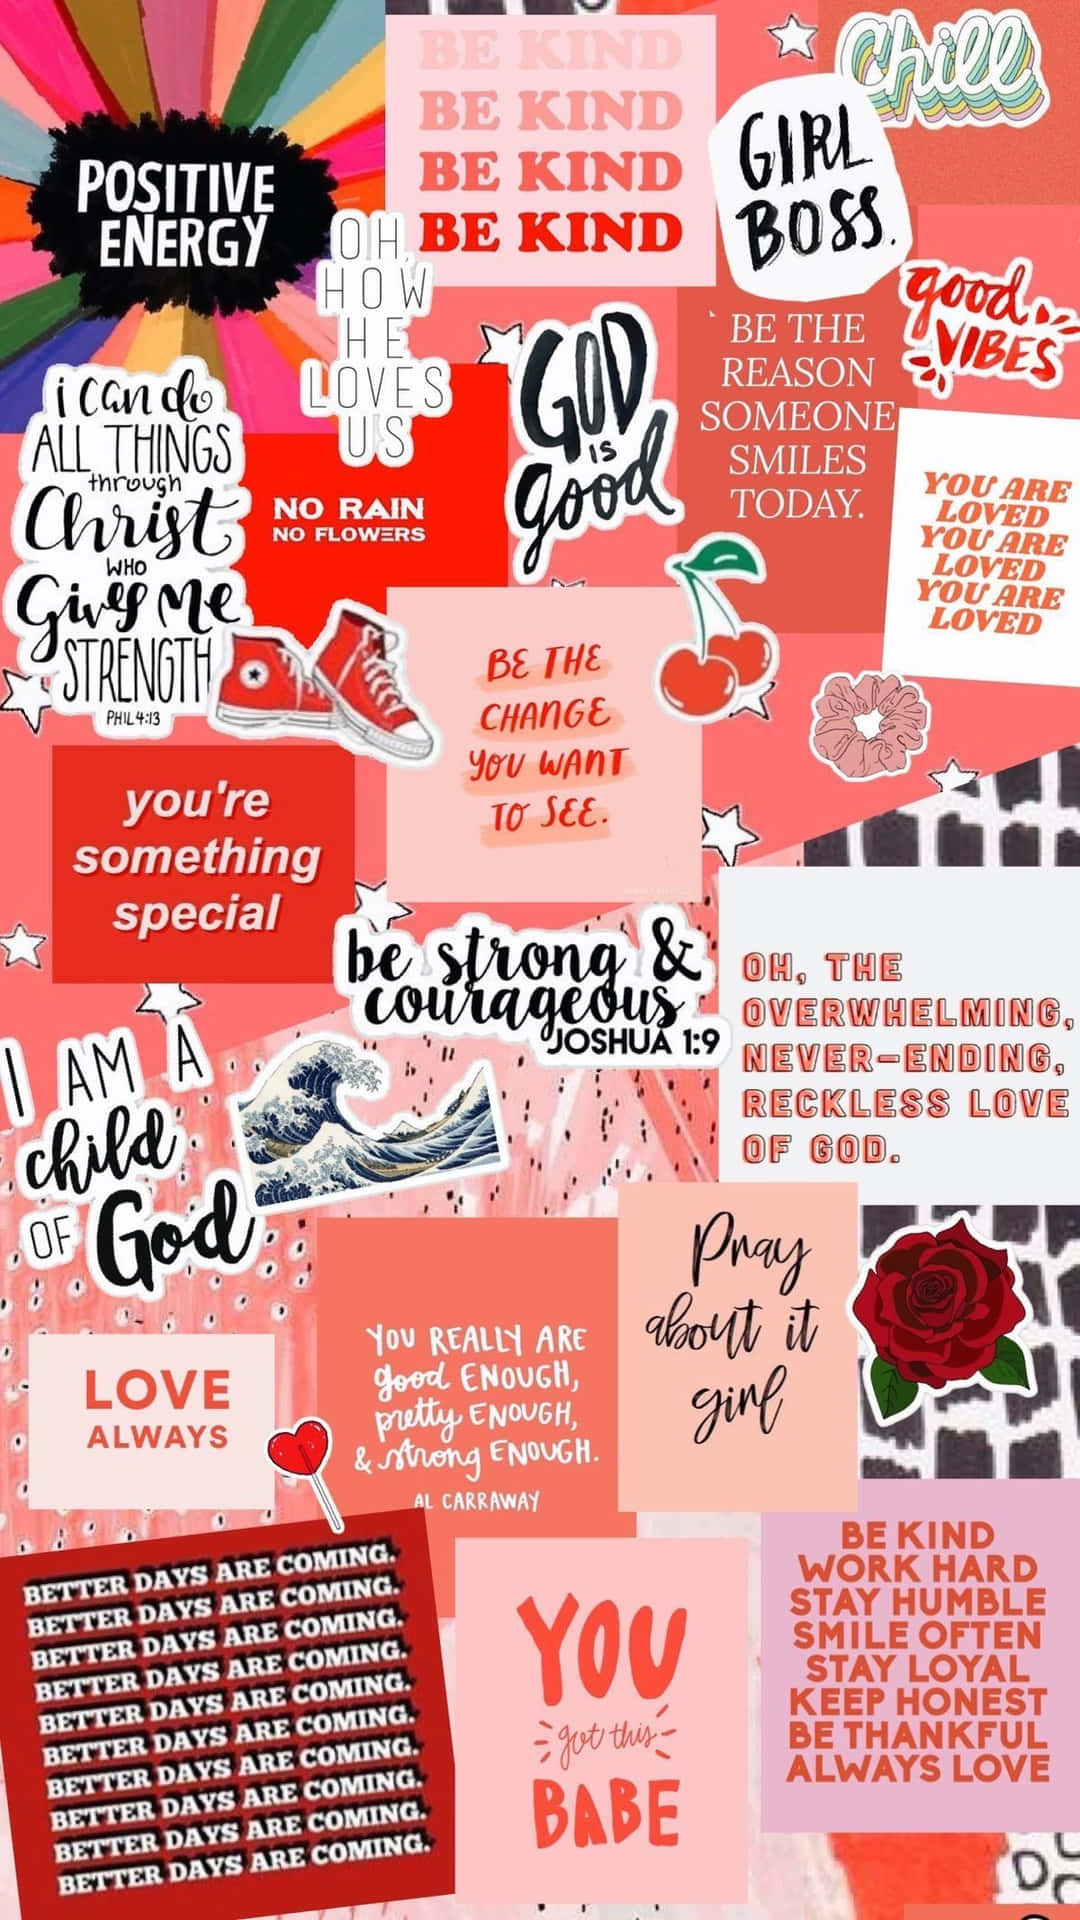 Christian Girl Aesthetic Inspirational Quotes Collage Wallpaper